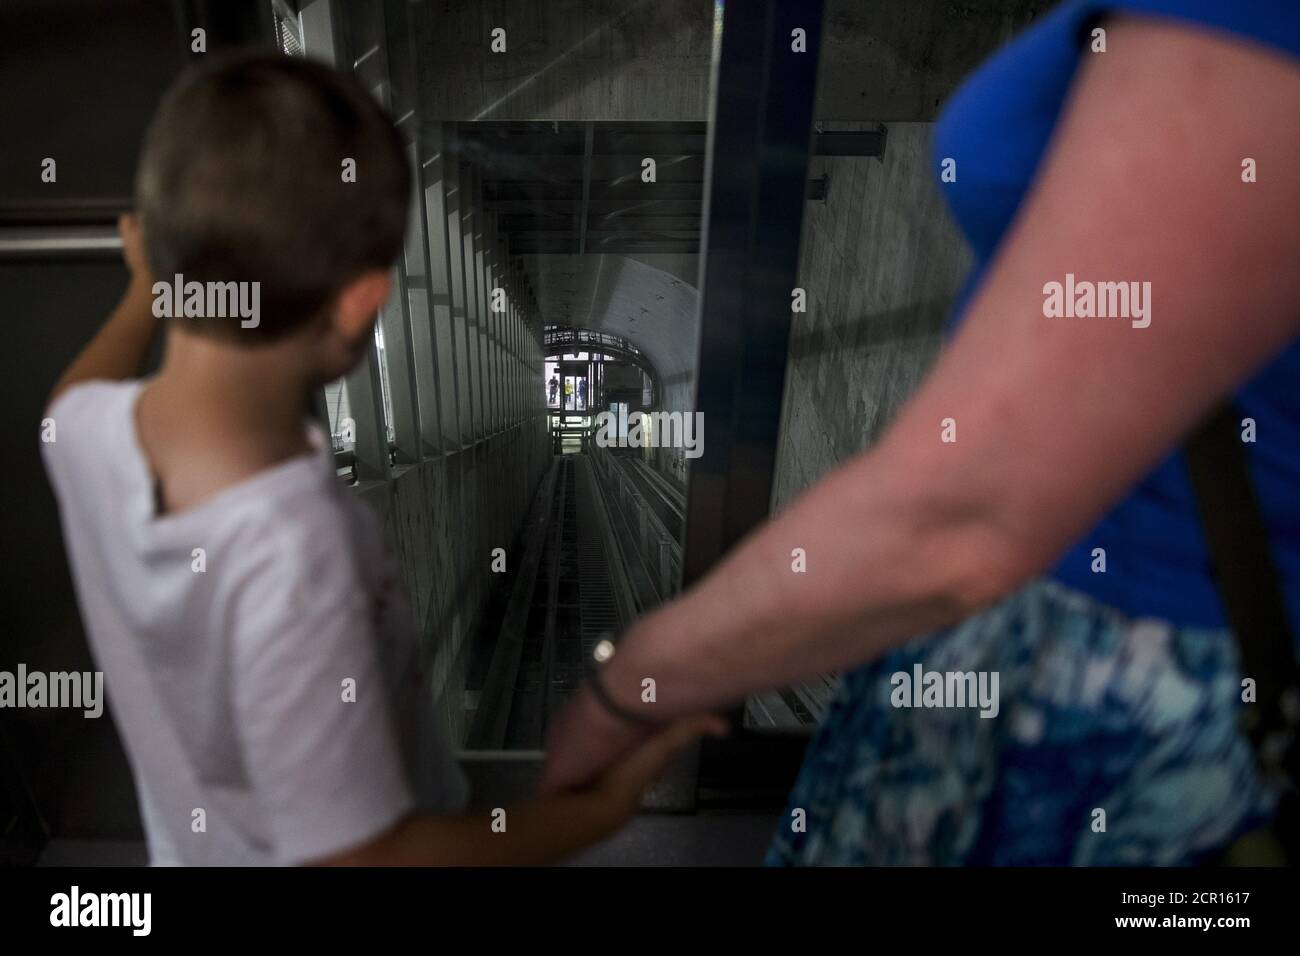 A young passenger looks ahead into the elevator shaft as he rides the inclined elevator at the new 34th St./Hudson Yards subway station in midtown Manhattan, New York, September 13, 2015. After eight years and $2.42 billion, the 34th Street and 11th Avenue stop on New York's 7 train line has opened, featuring the longest escalator and first inclined elevator on the city's subway system.   REUTERS/Brendan McDermid Stock Photo